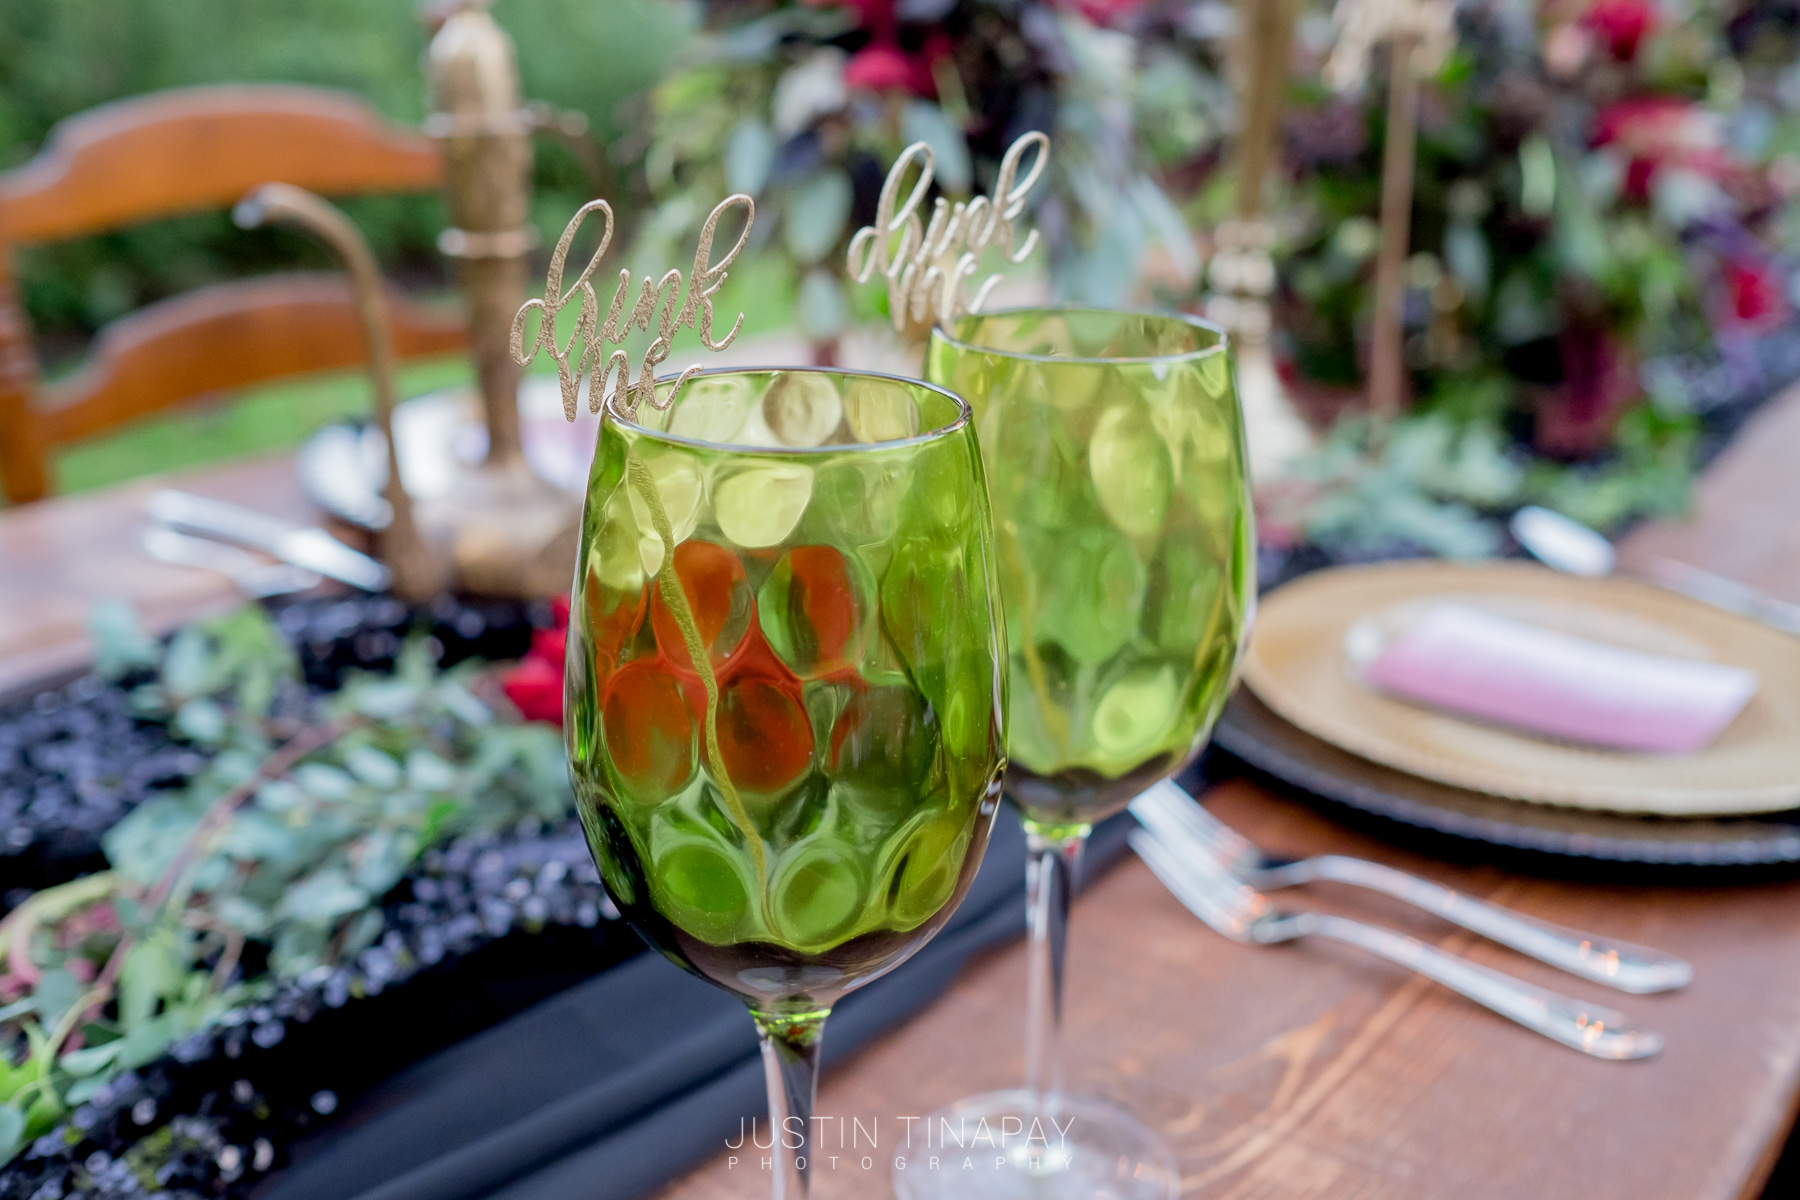 Use green glassware to wow your guests during cocktail hour and your reception. This unexpected and a great way to put a unique twist on a big trend!